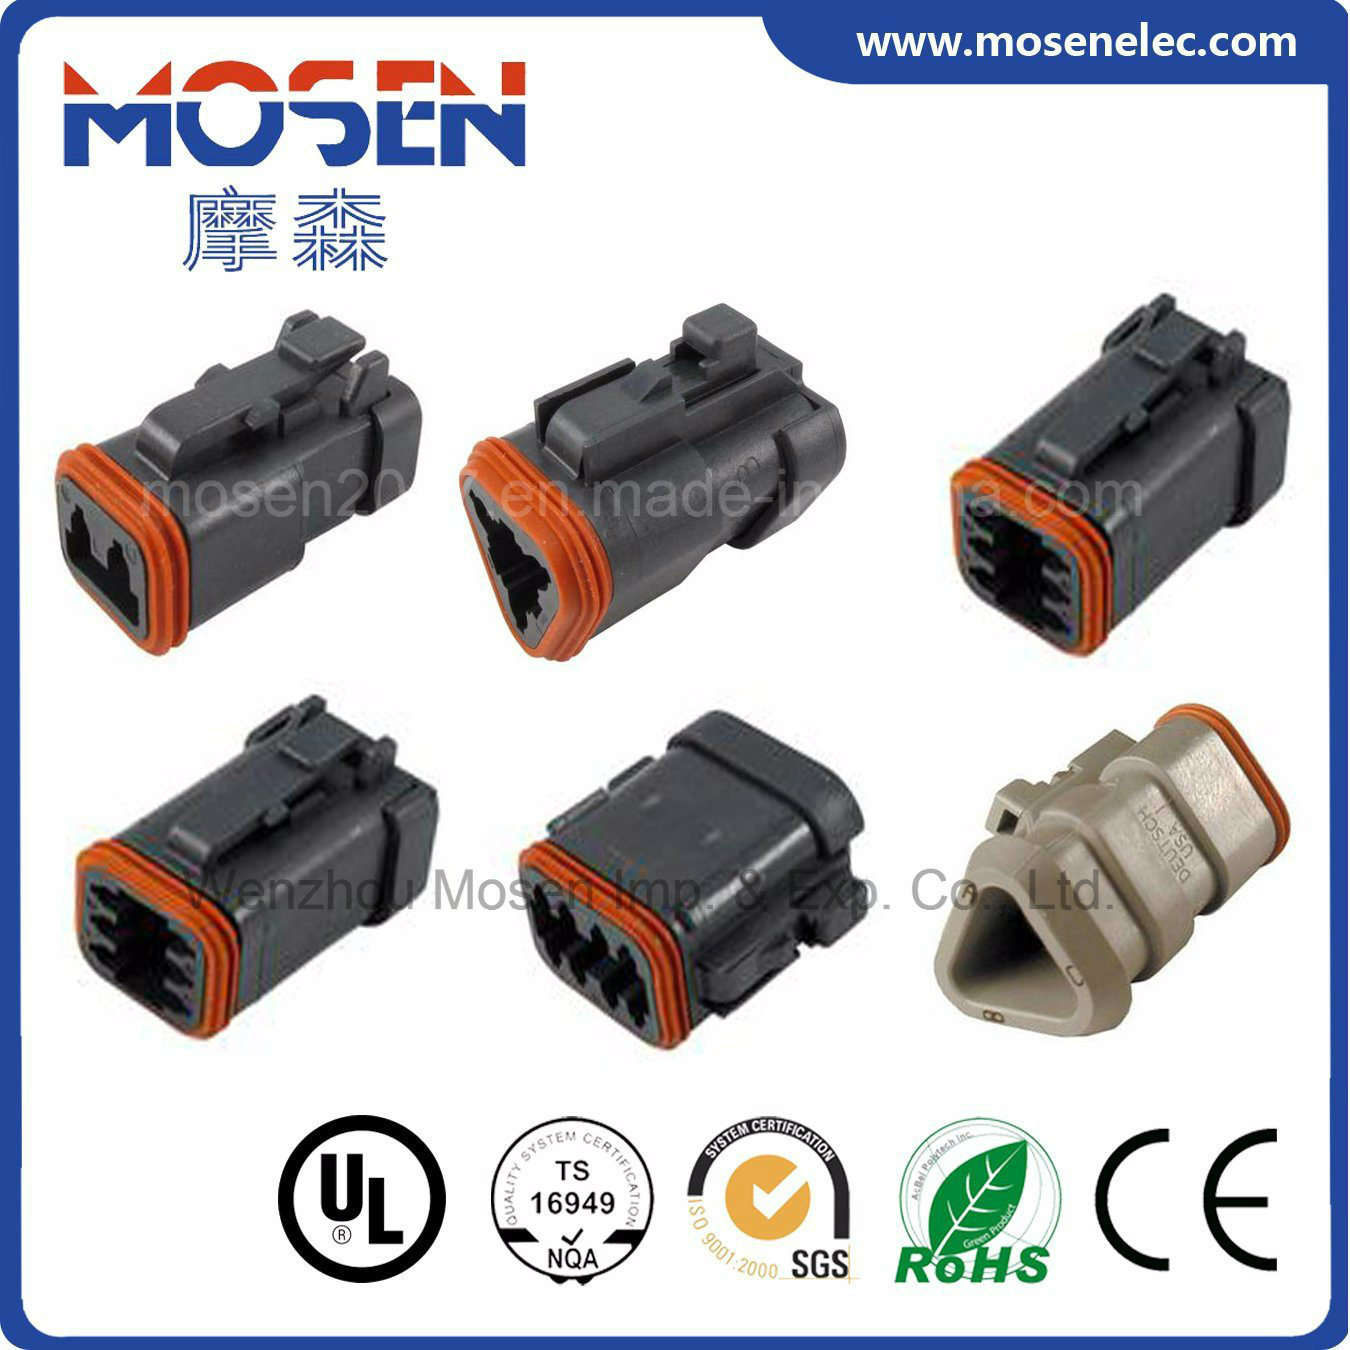 Deutsch Auto Connector Dt06-2s-E005 Dt06-3s-E005 Dt06-3s-E008 Dt06-4s-E005 Dt06-6s-E005 Dt06-8s-E005cwhao7a Wiring Harness for Car with Approvals